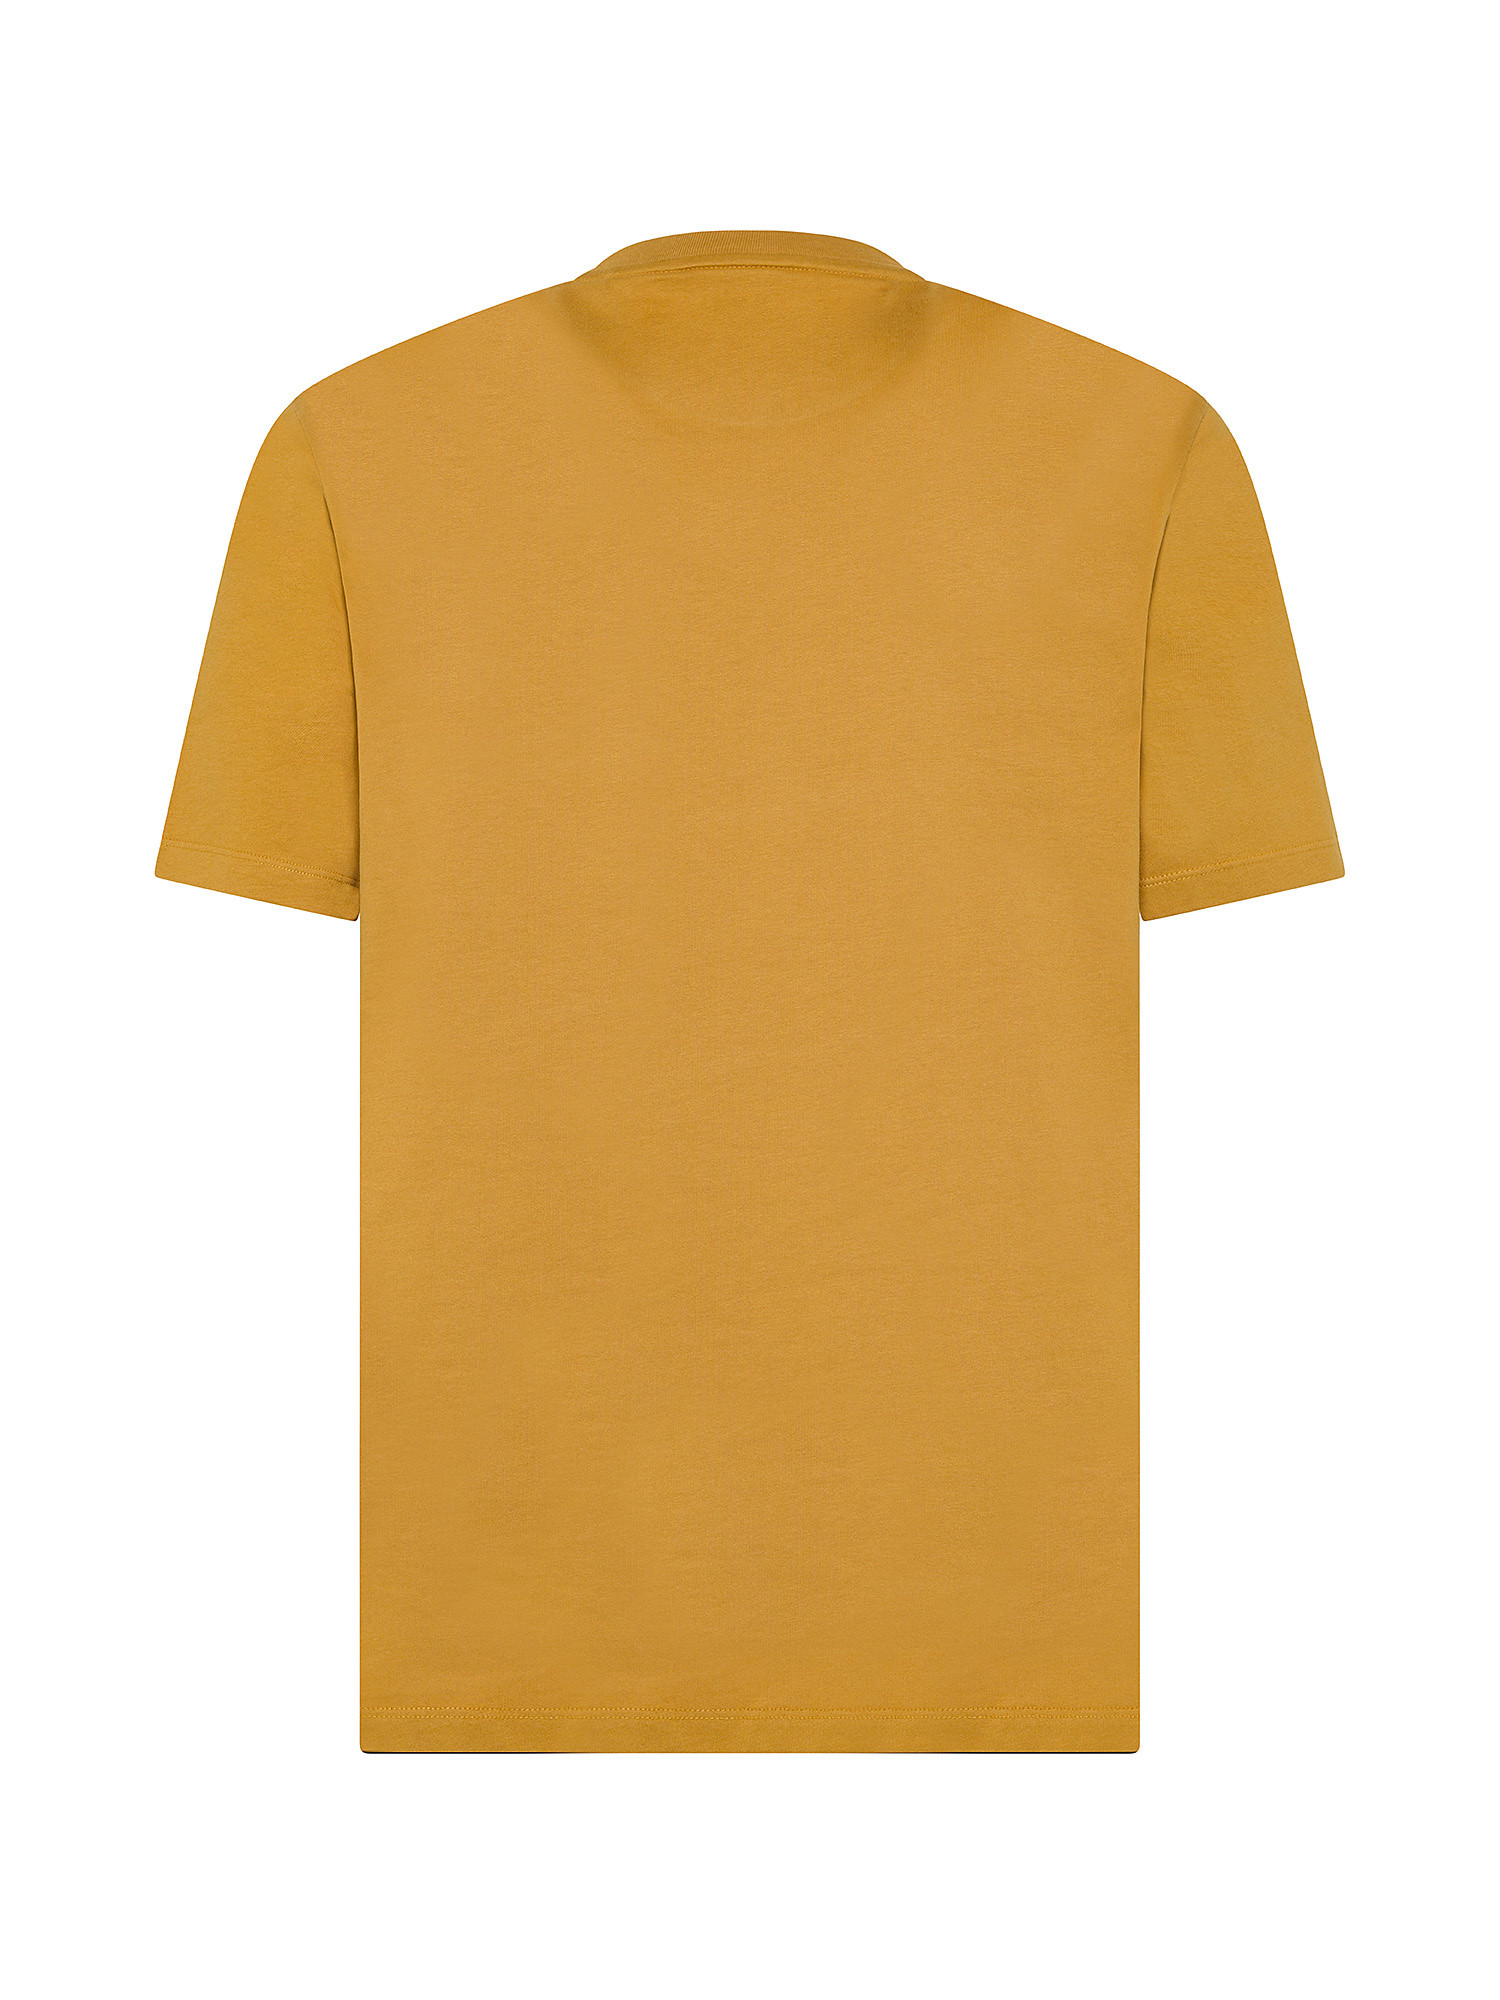 Hugo - T-shirt with embroidered logo in cotton, Camel, large image number 1